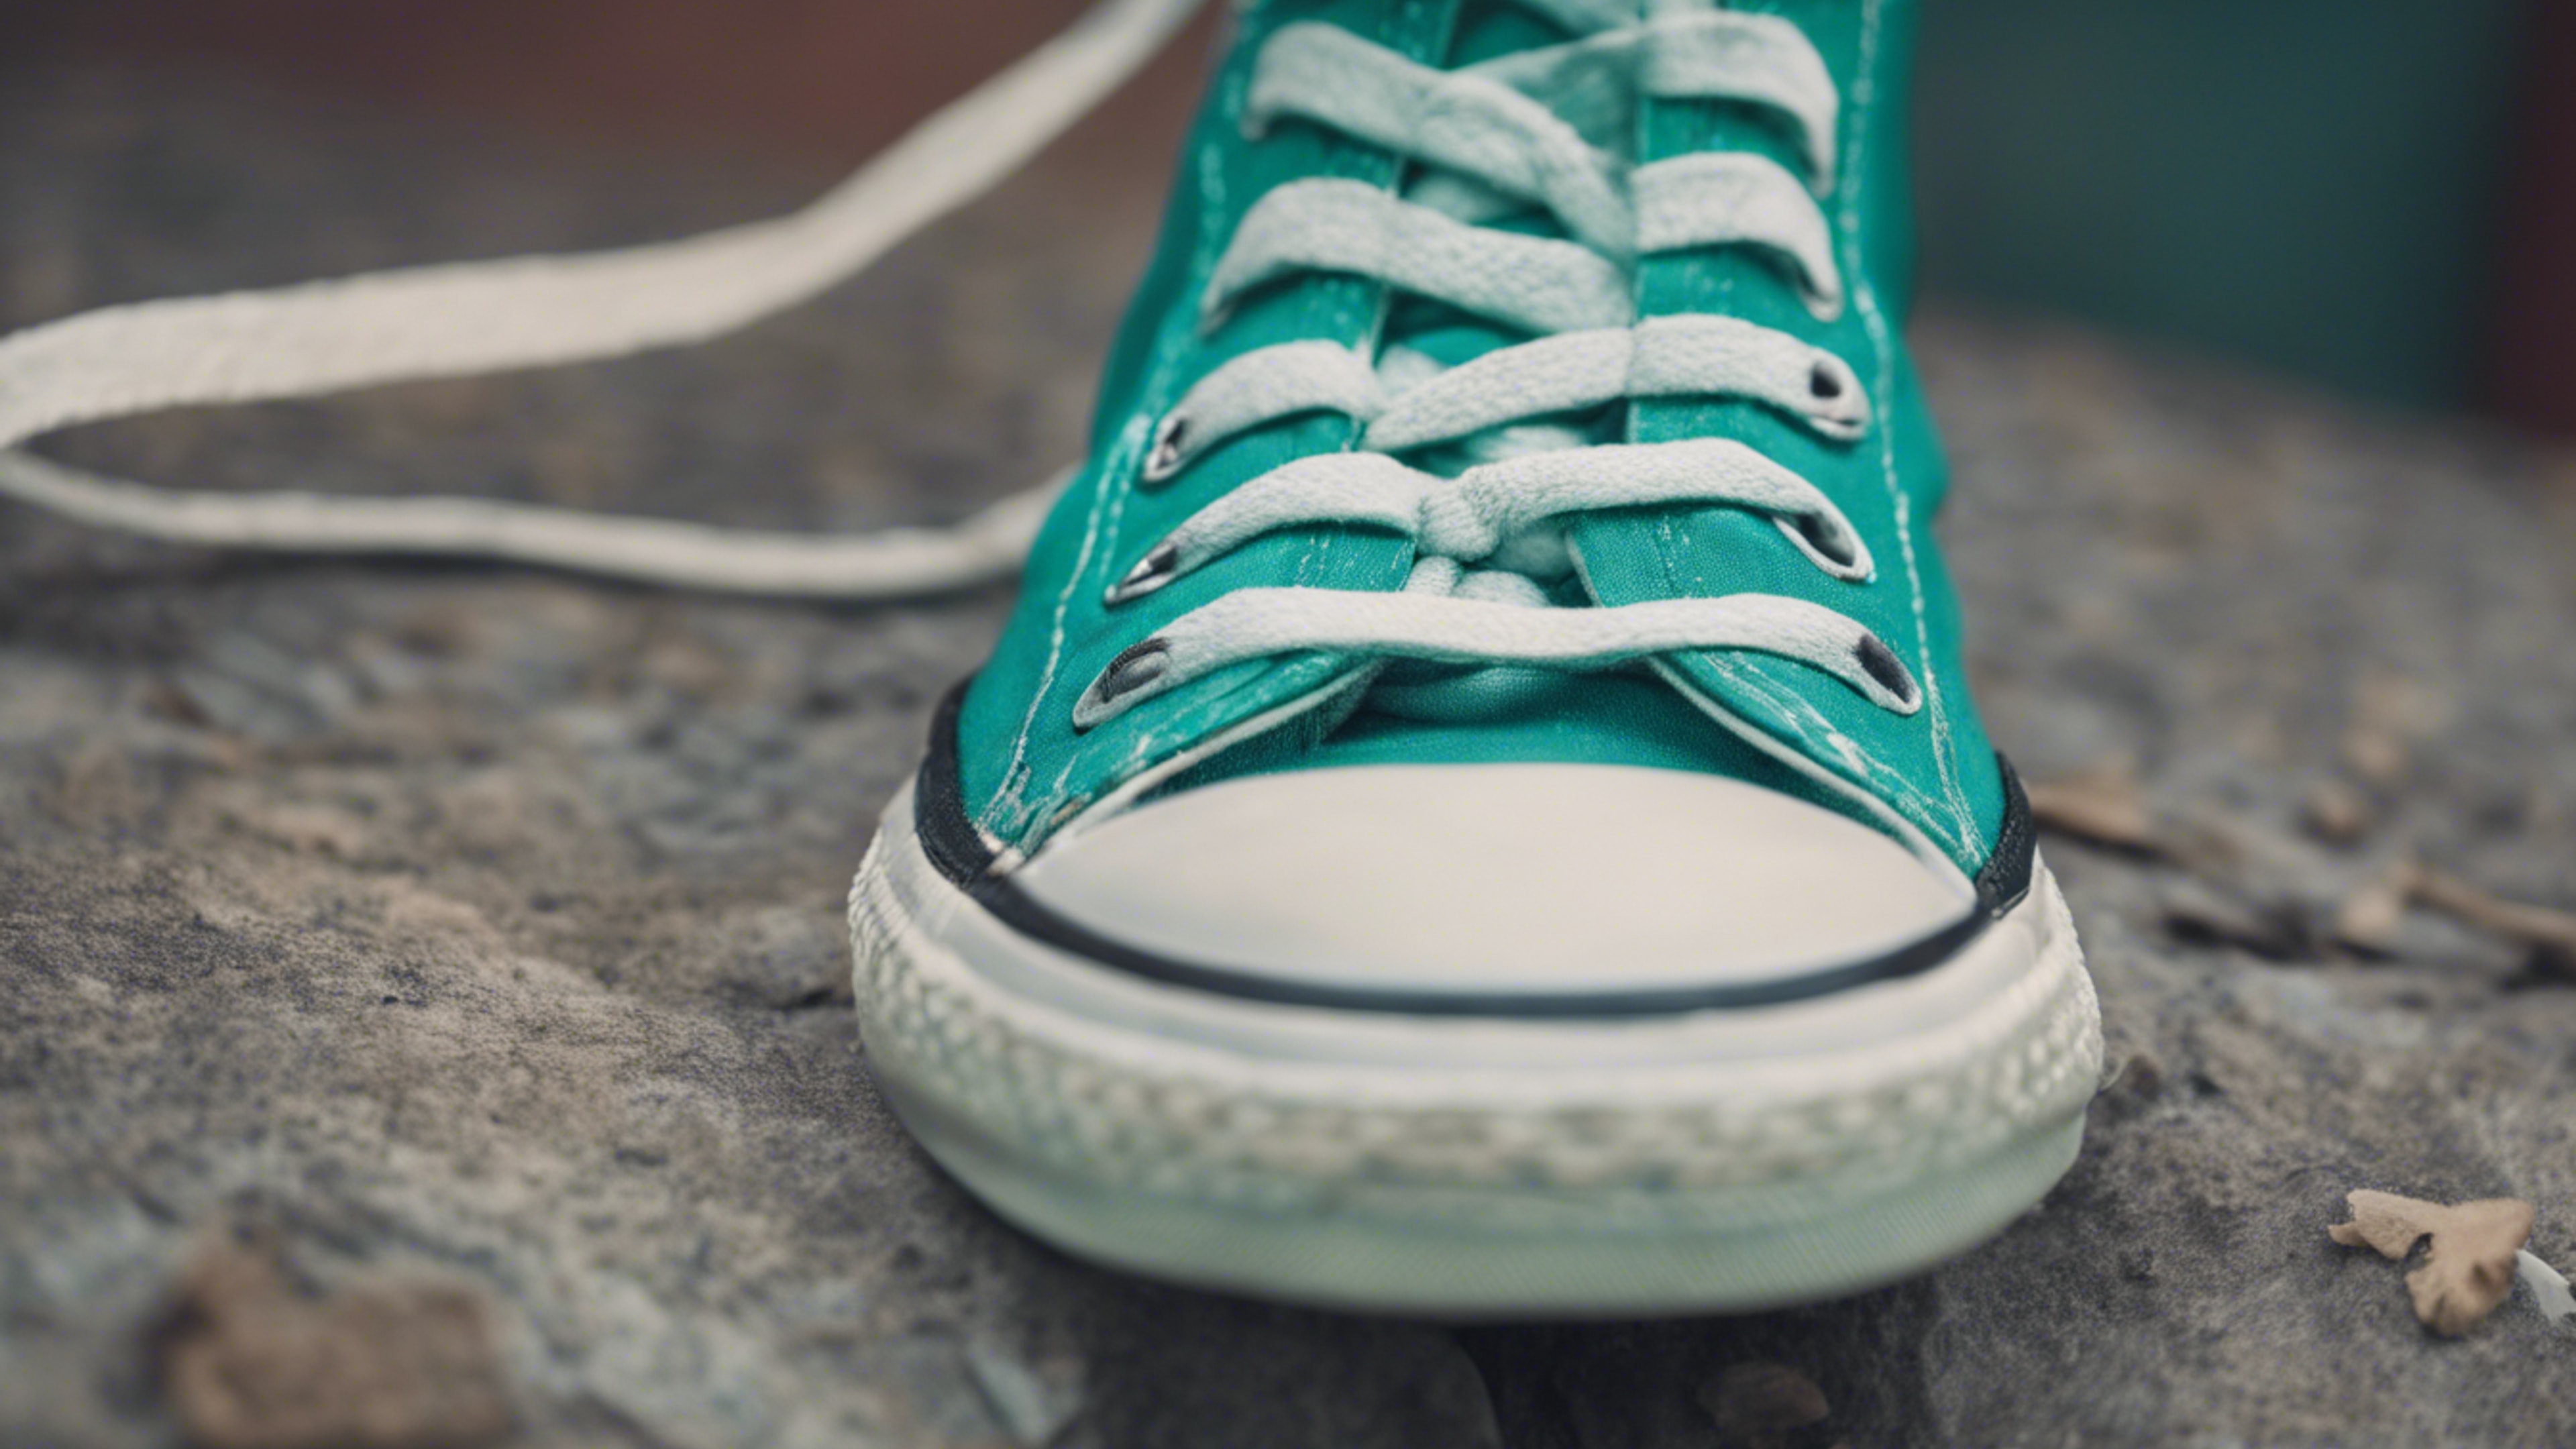 A close-up of a pair of cool teal colored Converse sneakers. Papel de parede[fe0f07076e3947159bbd]